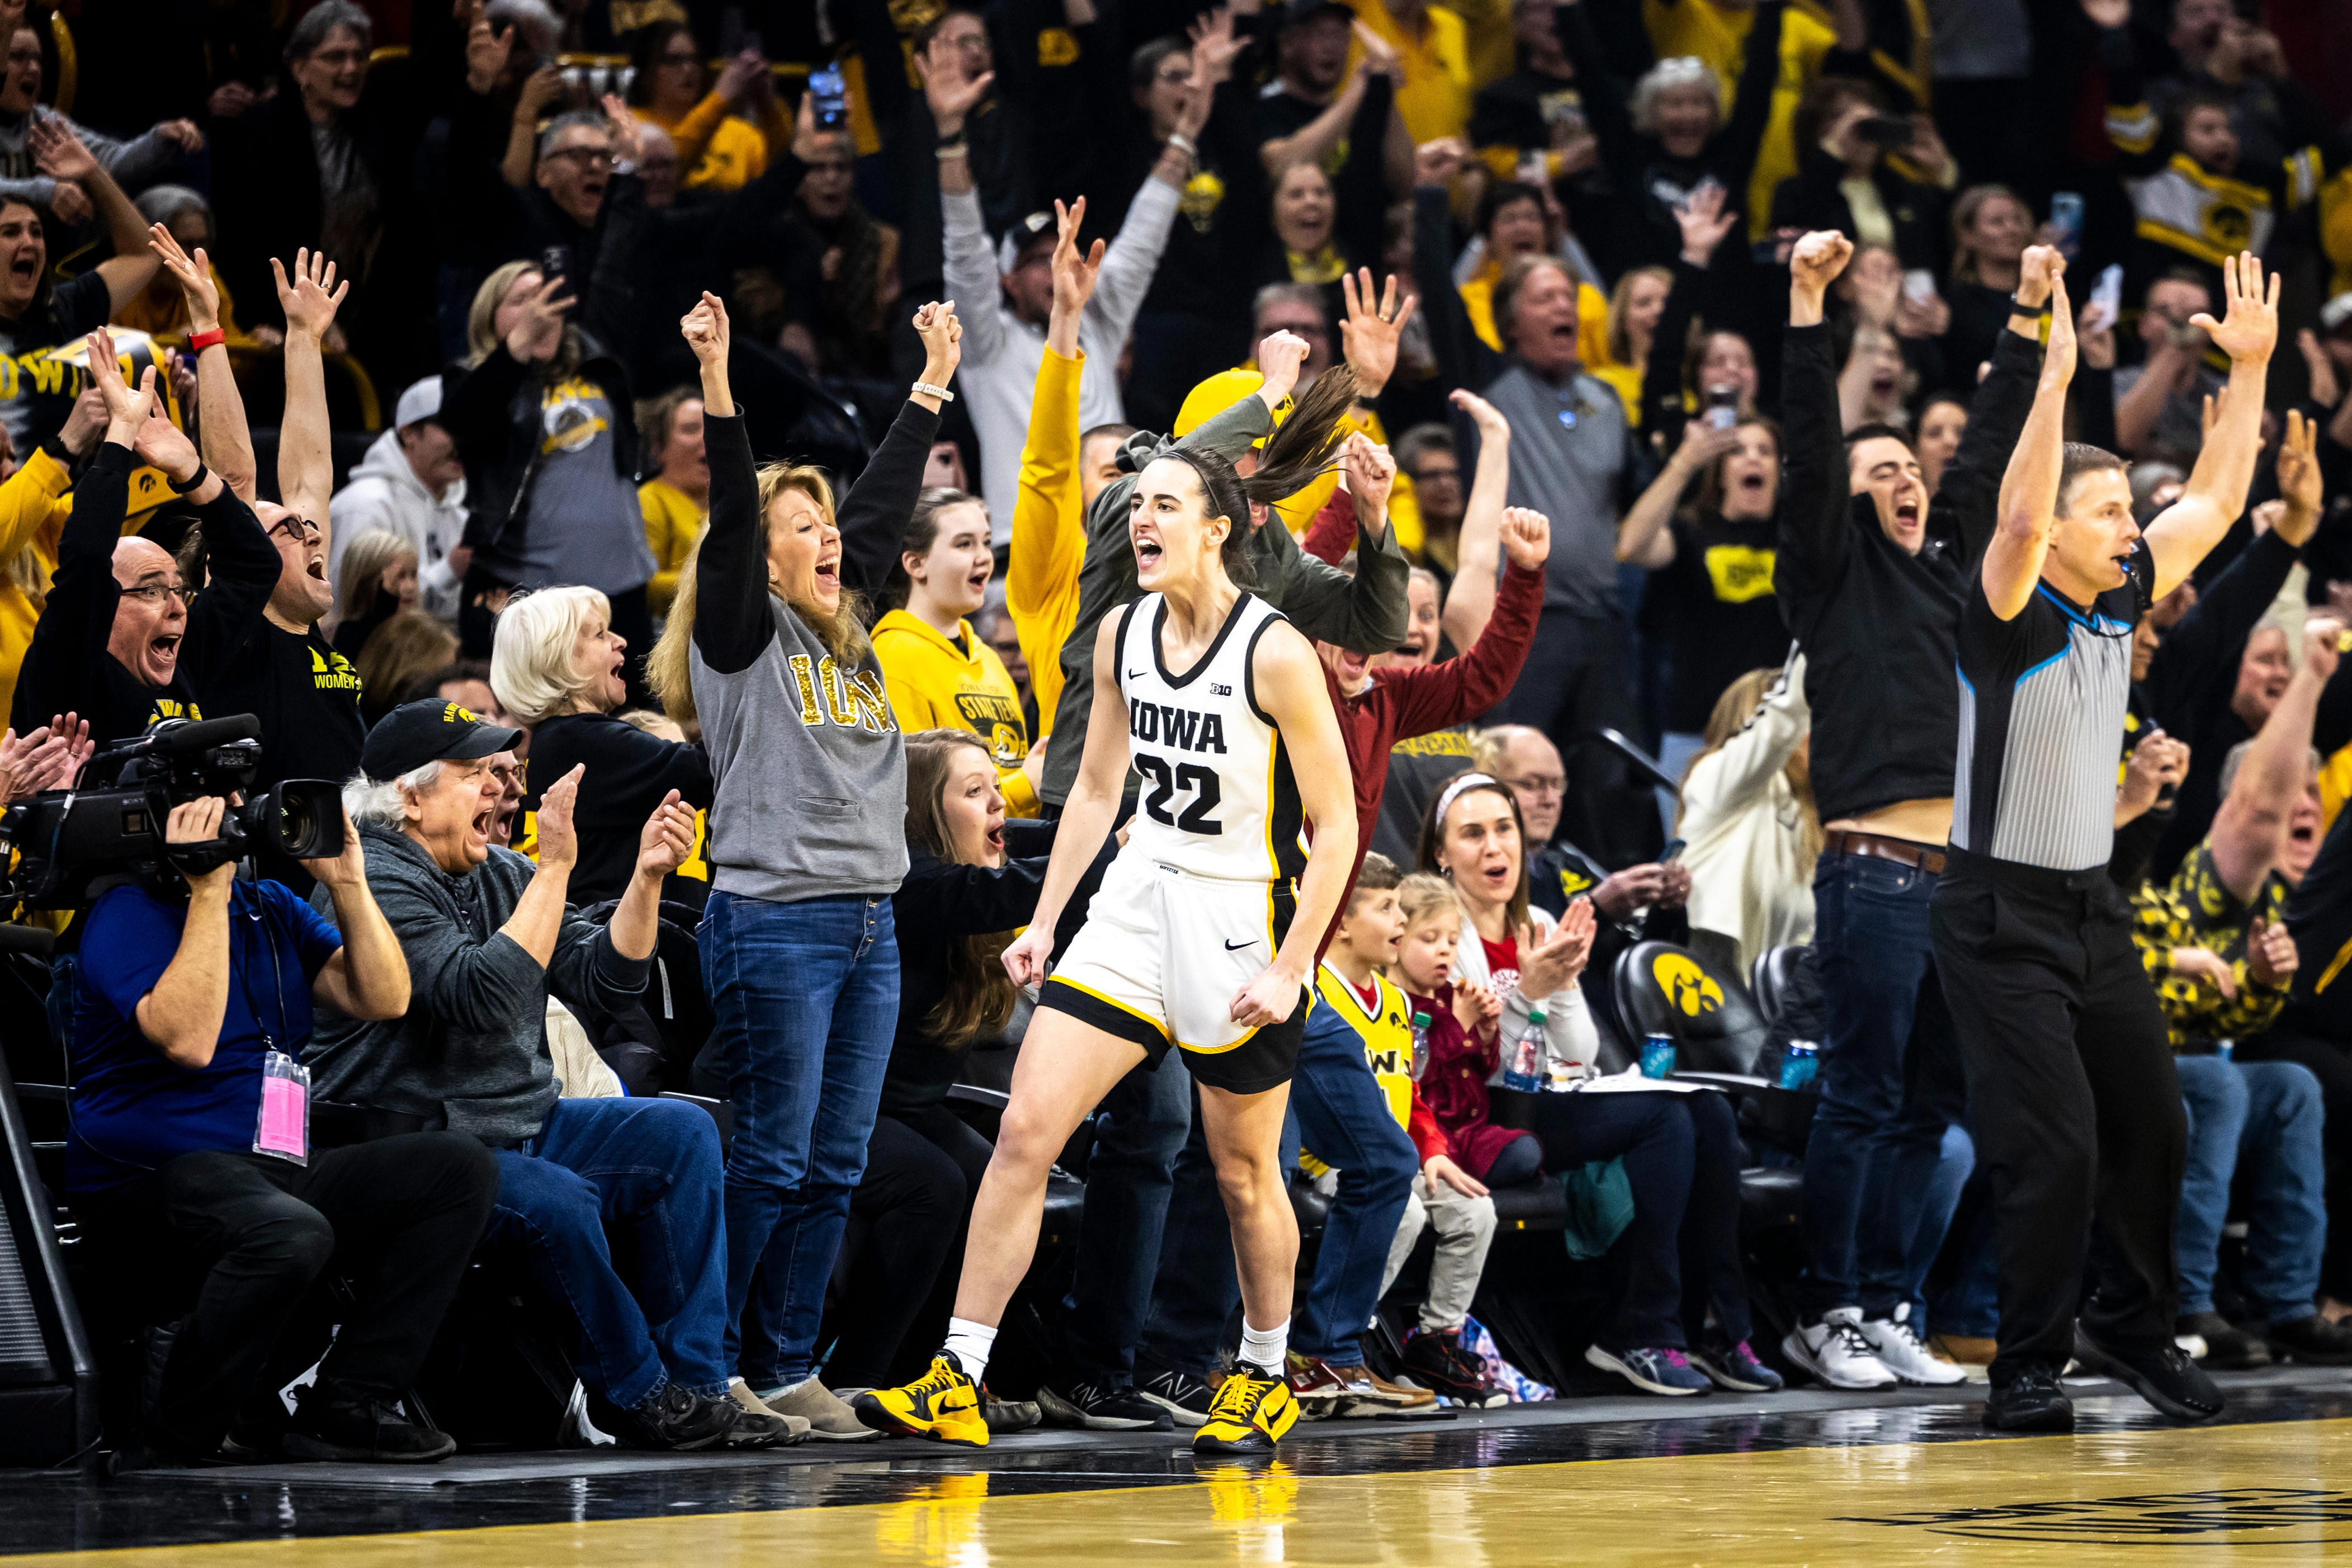 caitlin clark broke the ncaa scoring record with a 3-point logo shot and hoops fans were gobsmacked